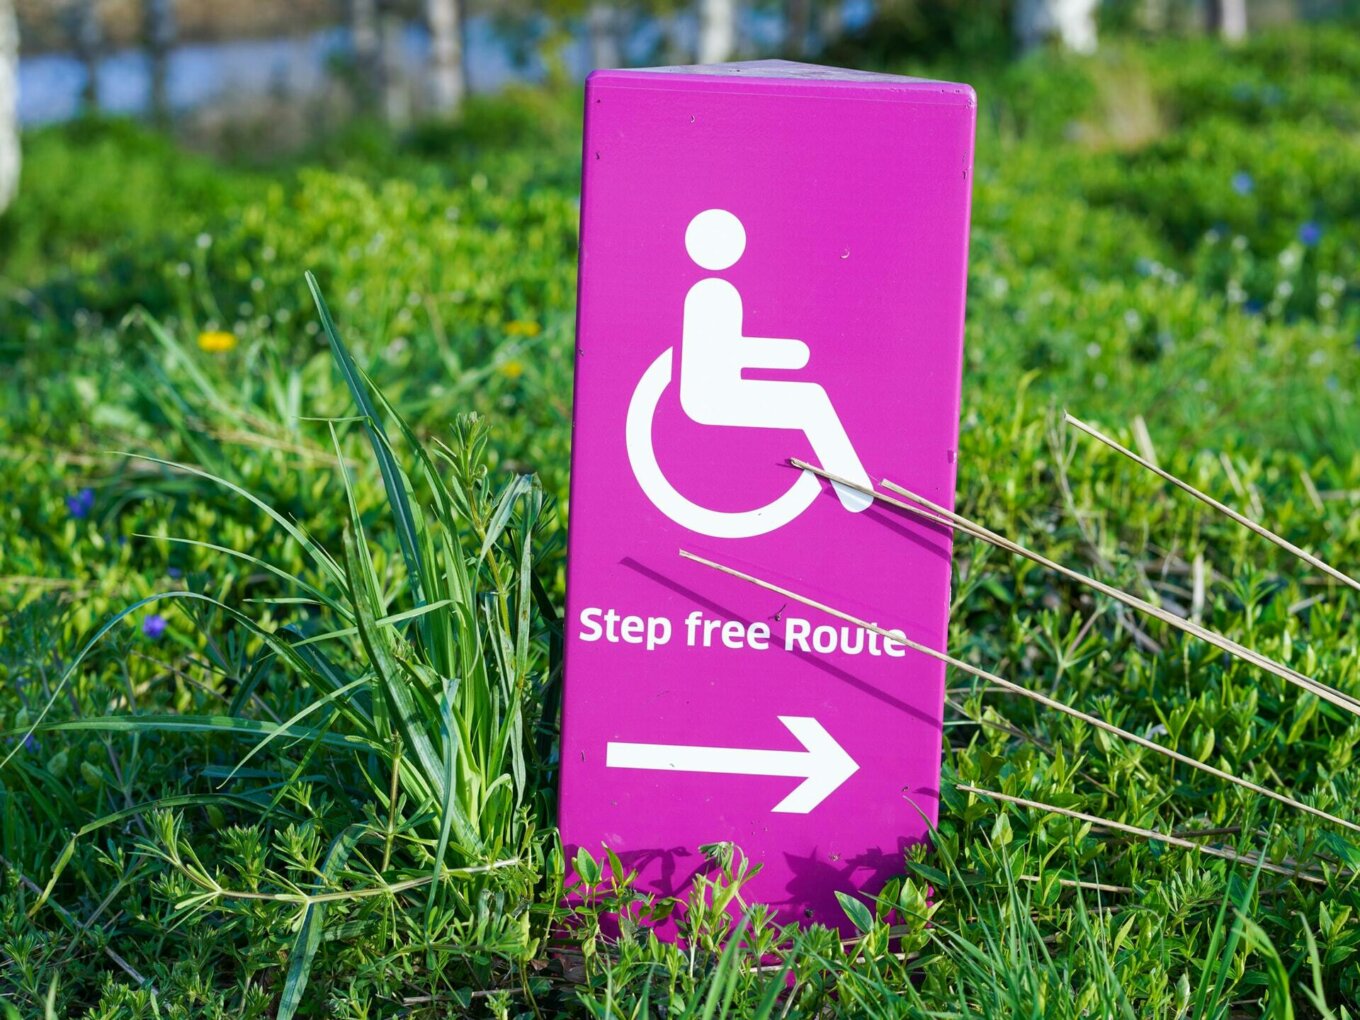 A pink sign on grass that says Step free route